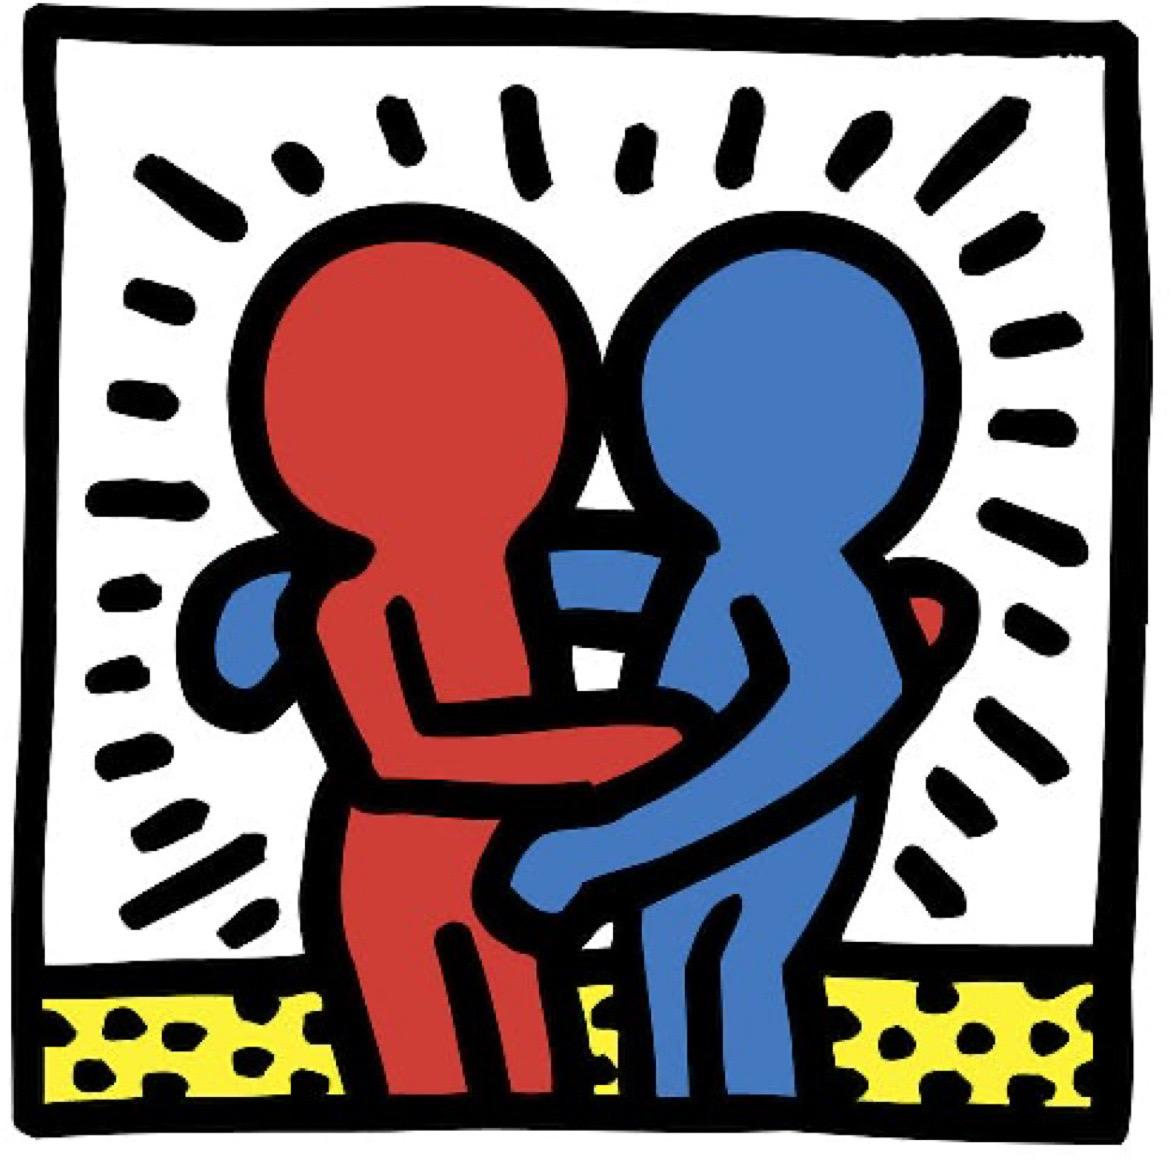 Keith Haring, Untitled, 1987